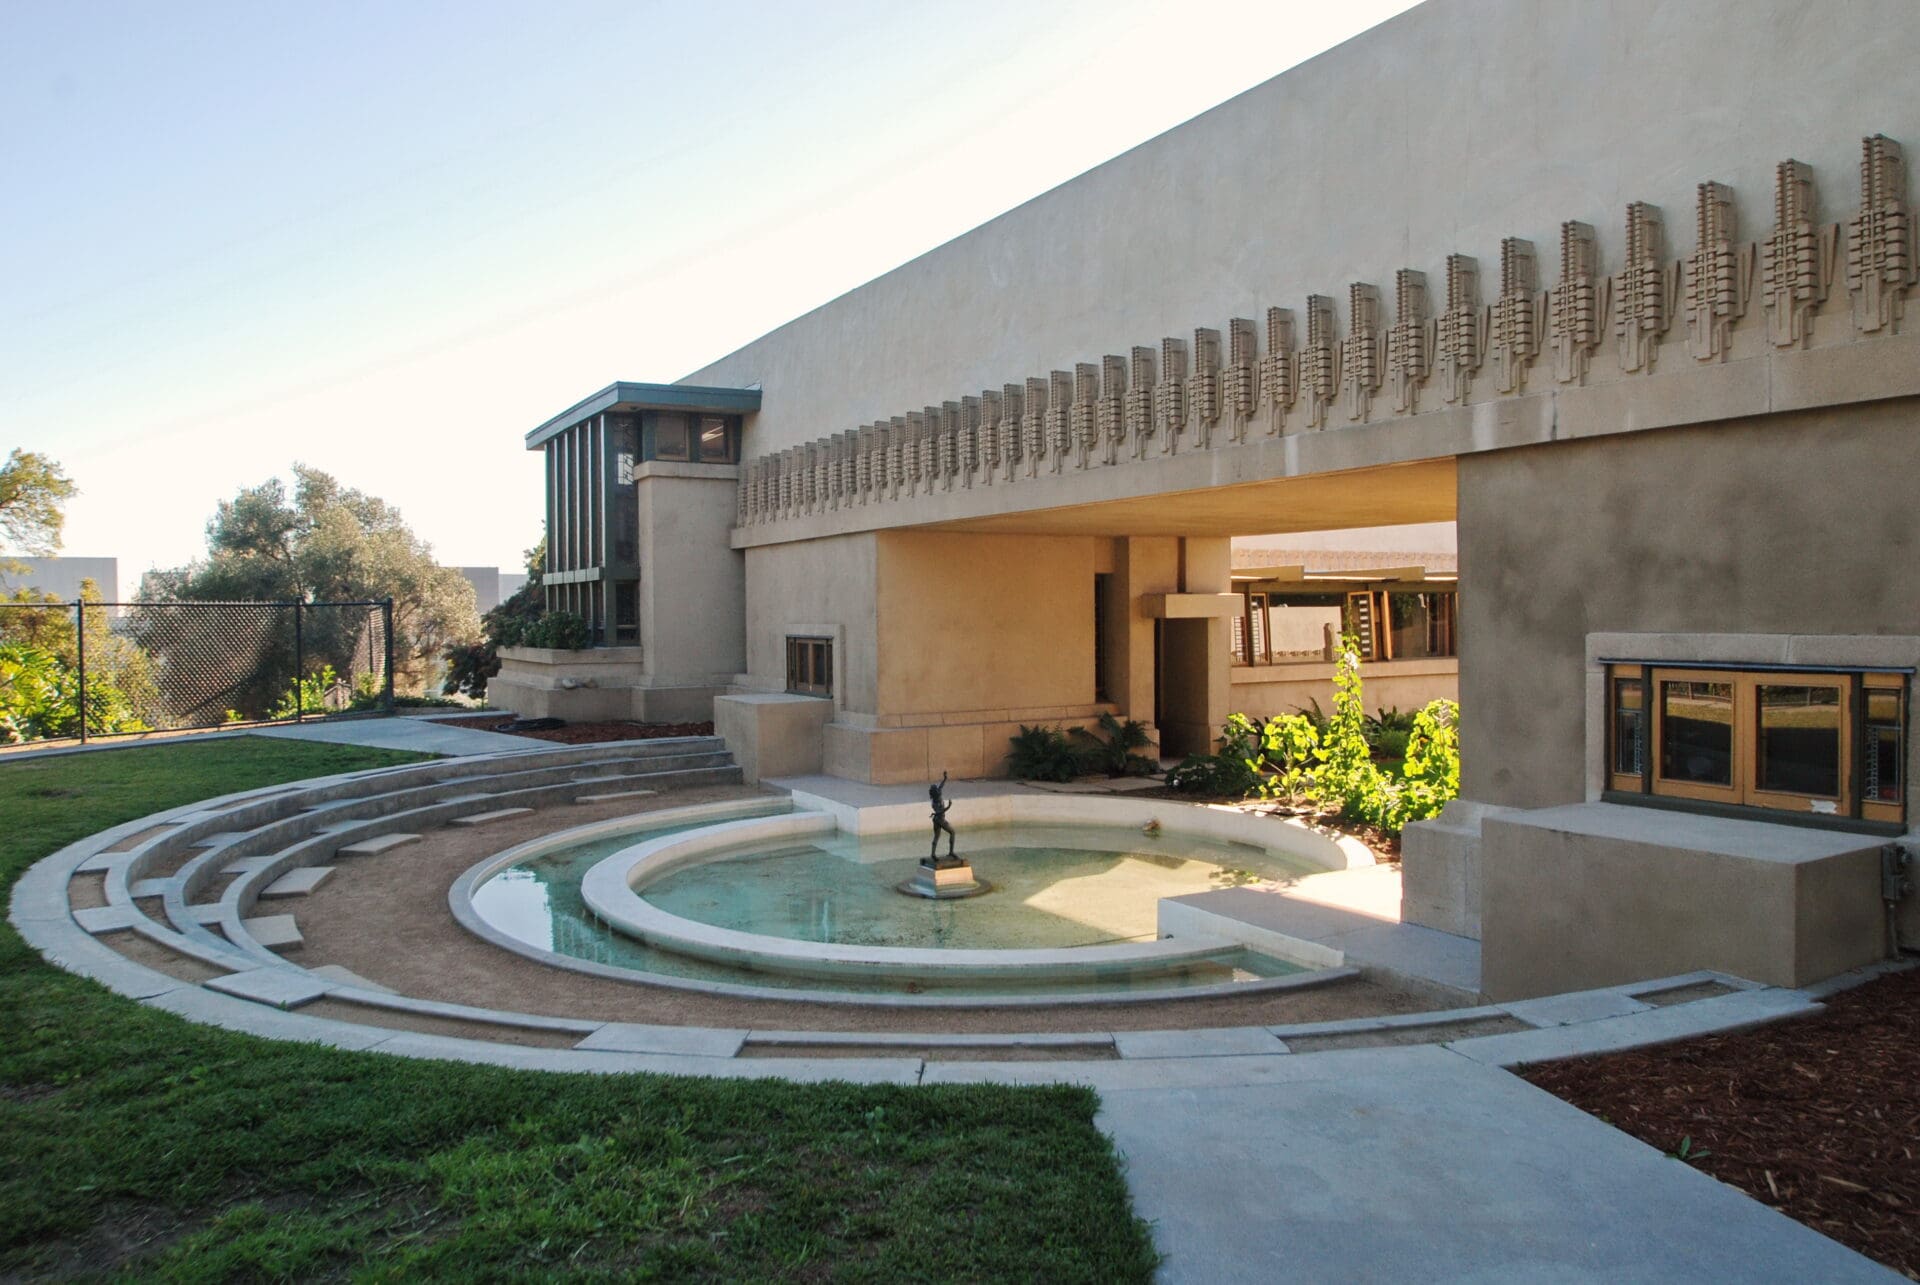 The best museums and galleries in LA | A view of the circular water fountain at Frank Lloyd Wright's Hollyhock House, with a small bronze statue at the centre